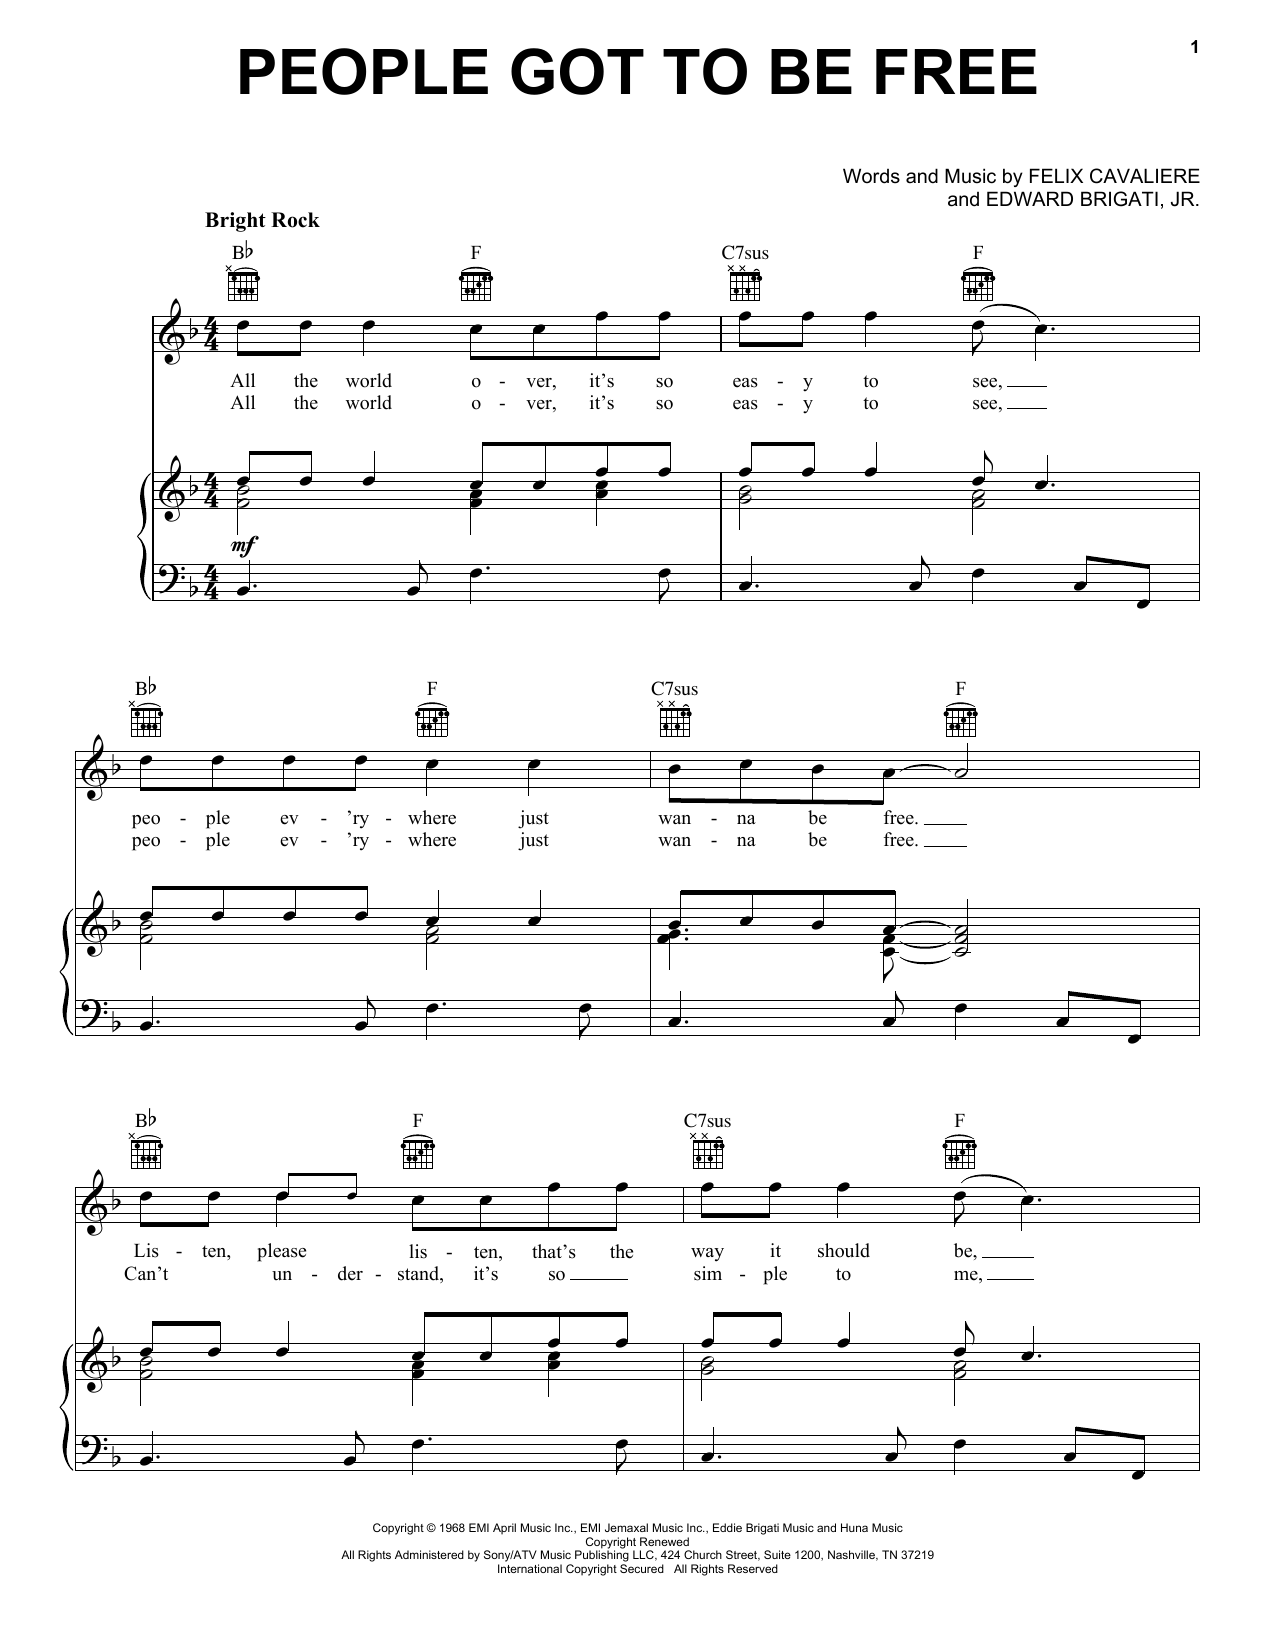 The Rascals People Got To Be Free sheet music notes printable PDF score